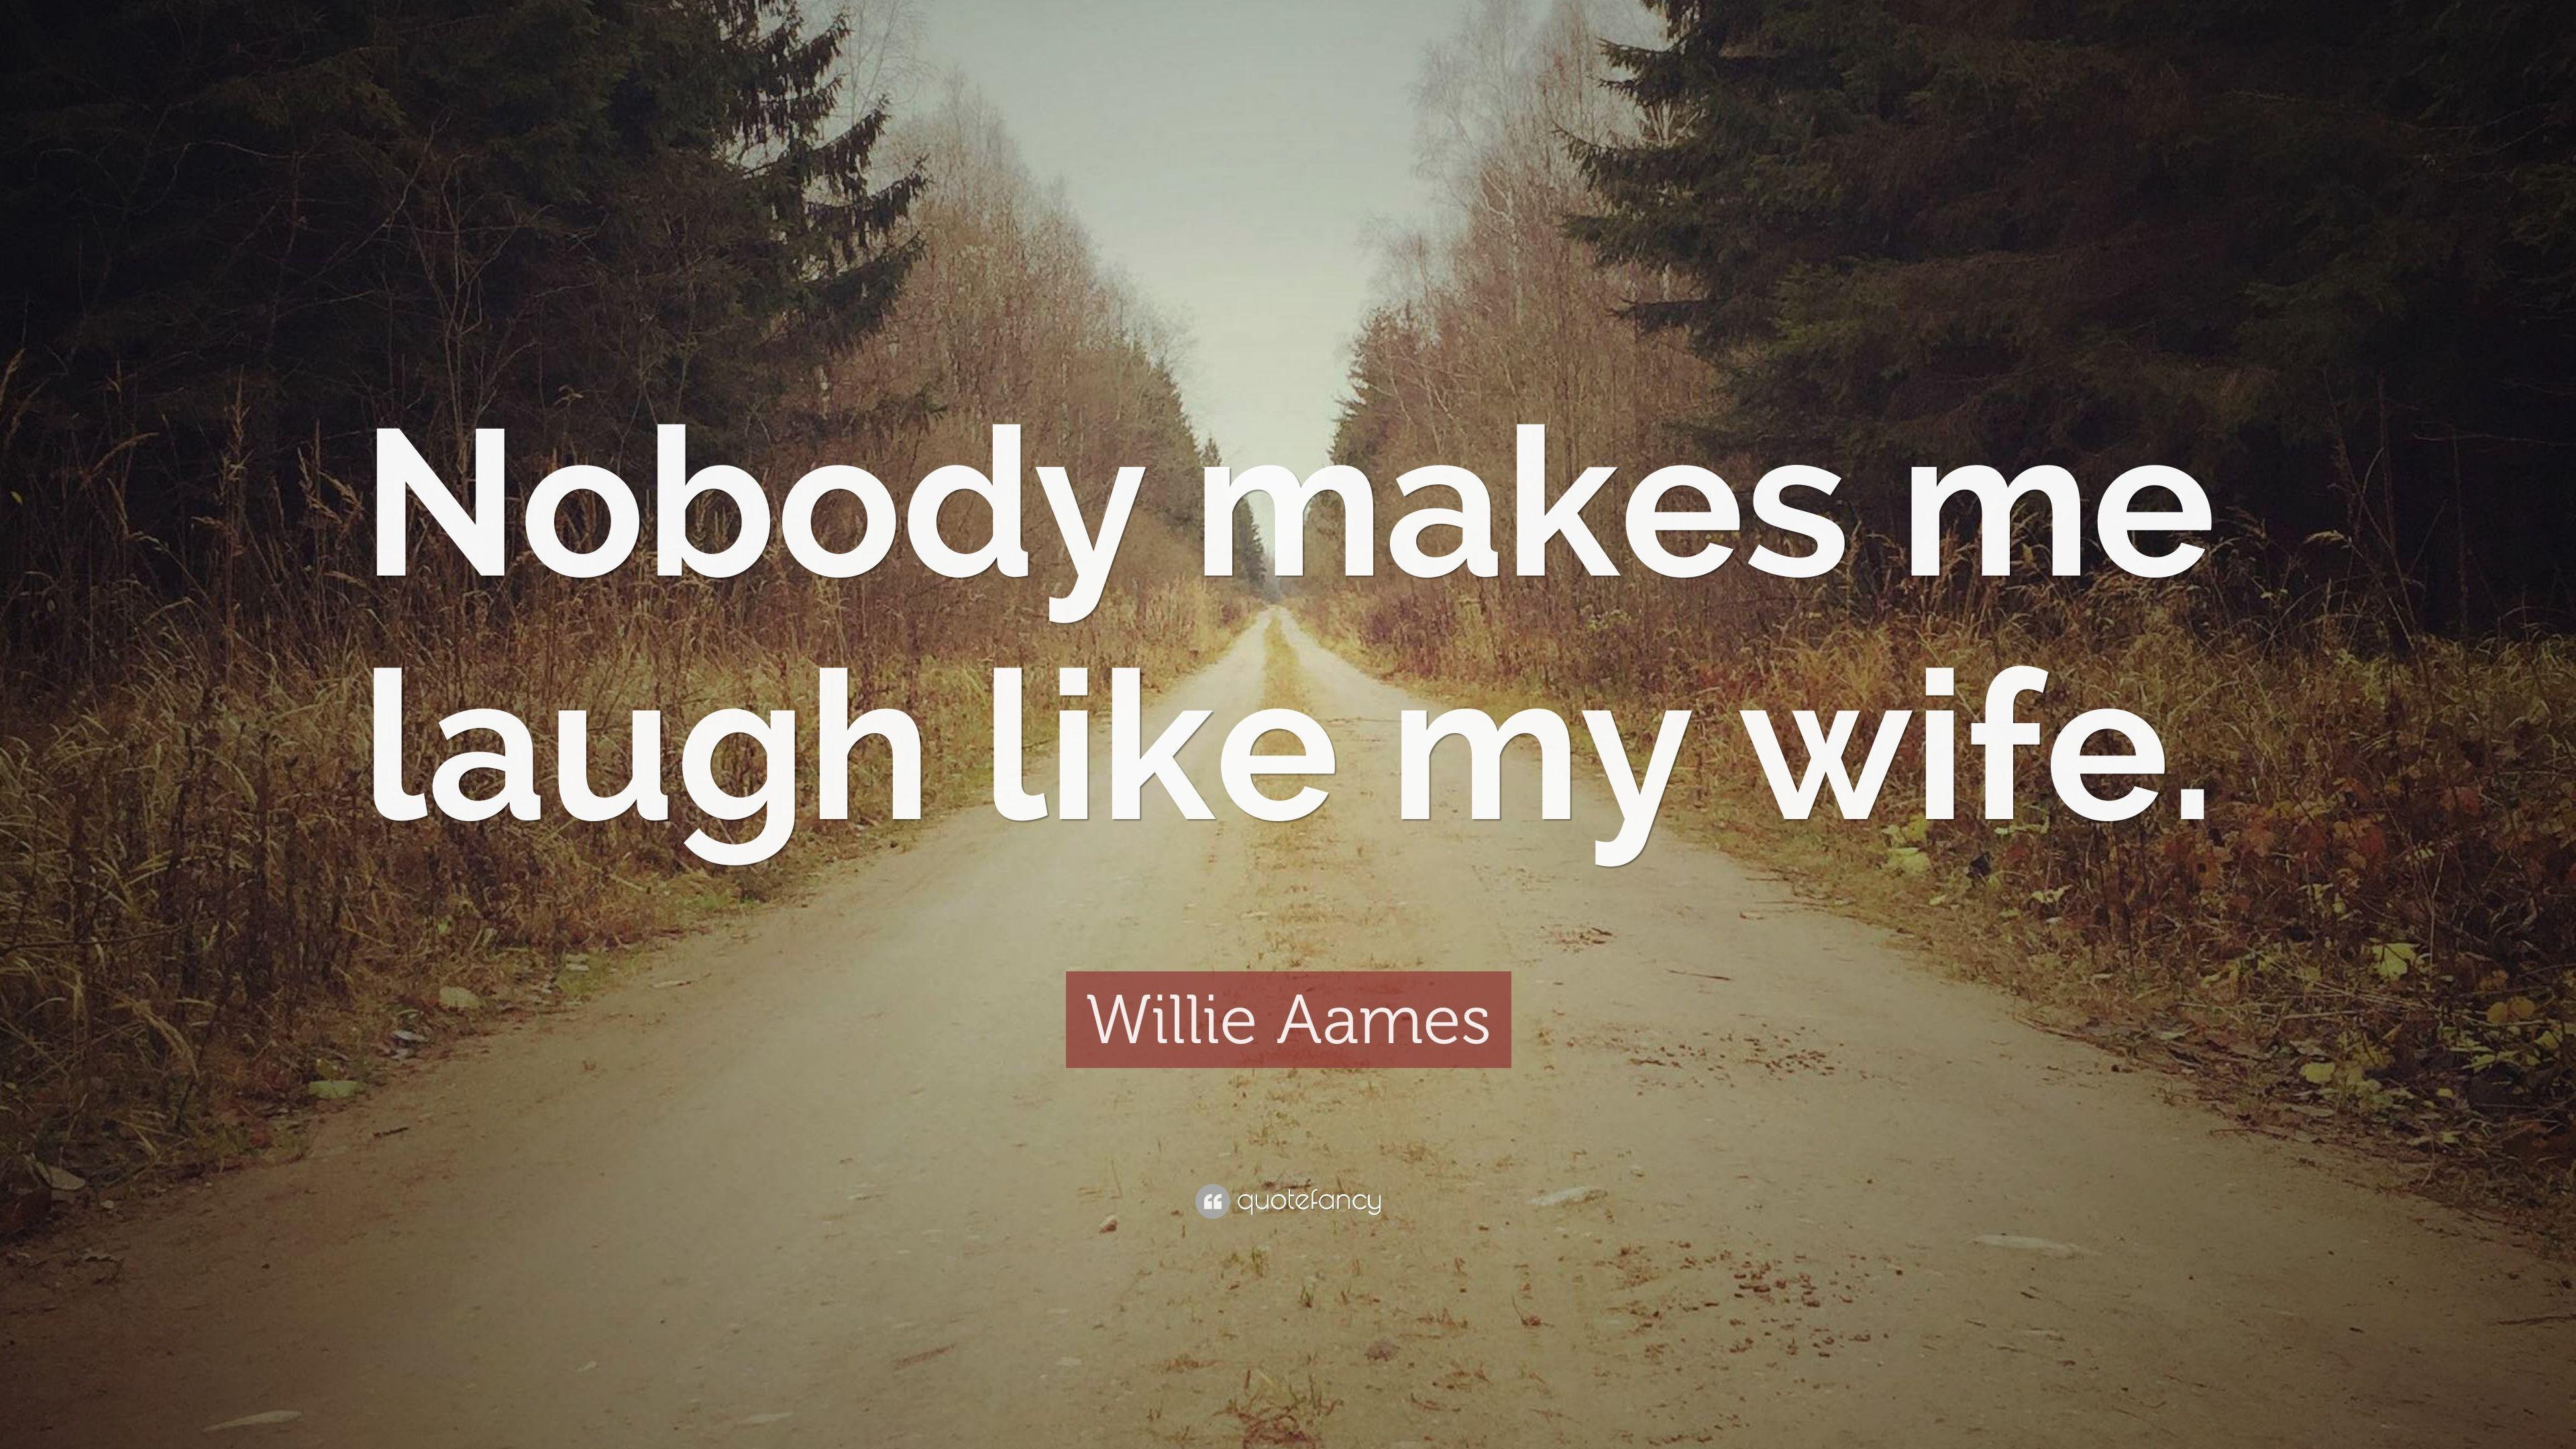 Willie Aames Quote: “Nobody makes me laugh like my wife.” 7